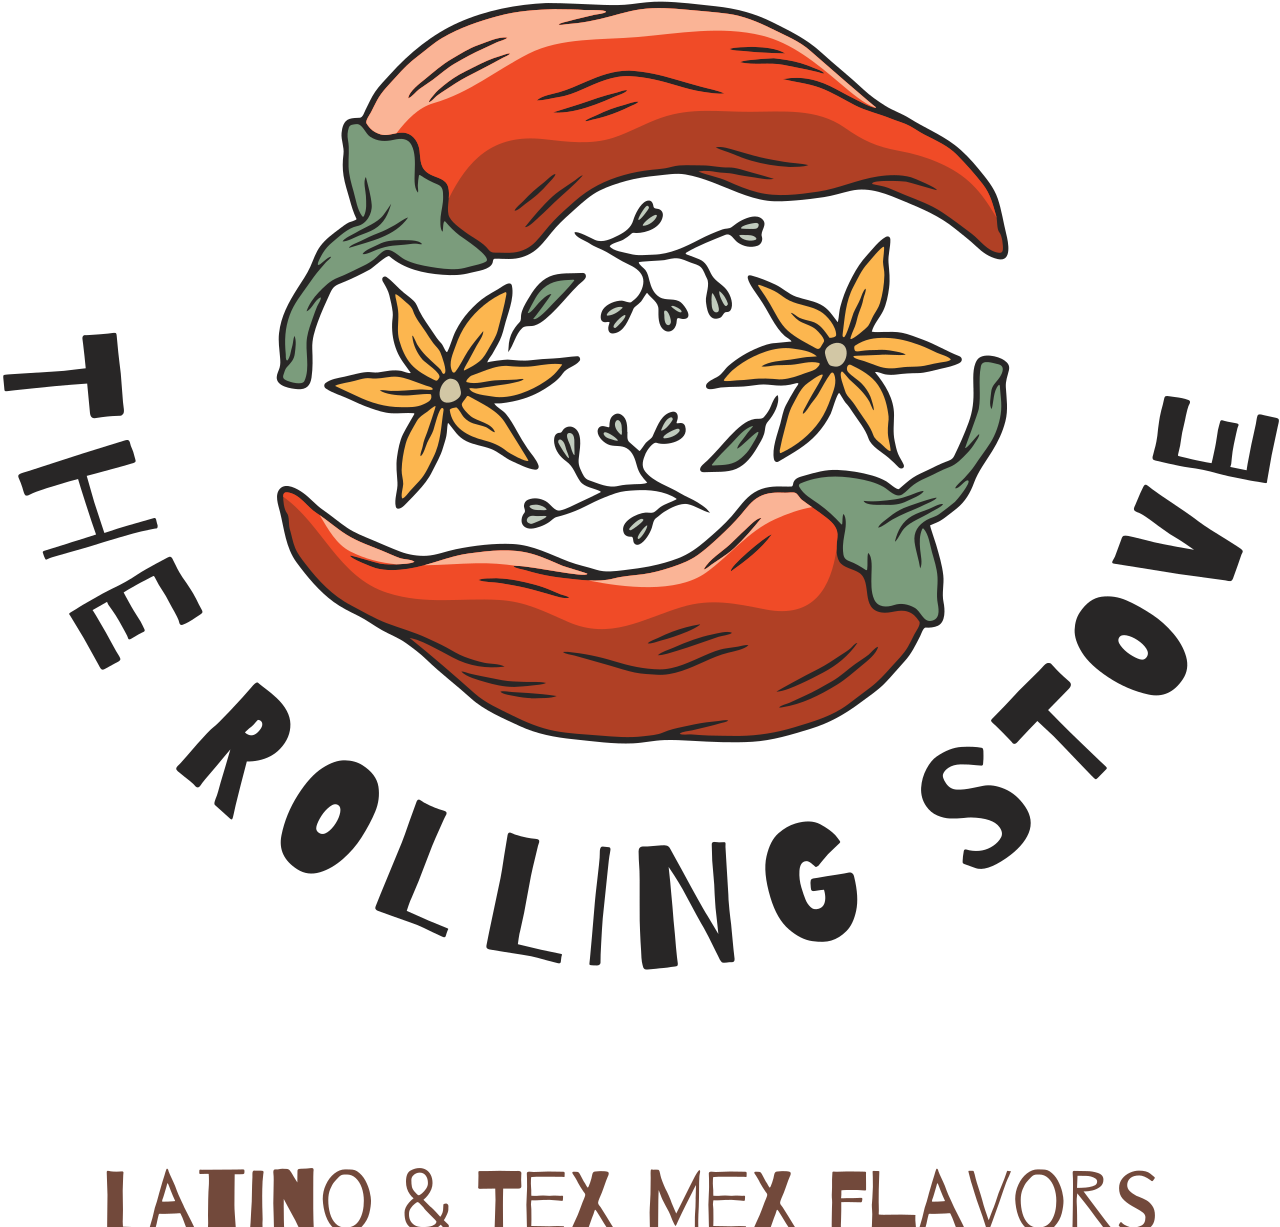 THE ROLLING STOVE 's web page